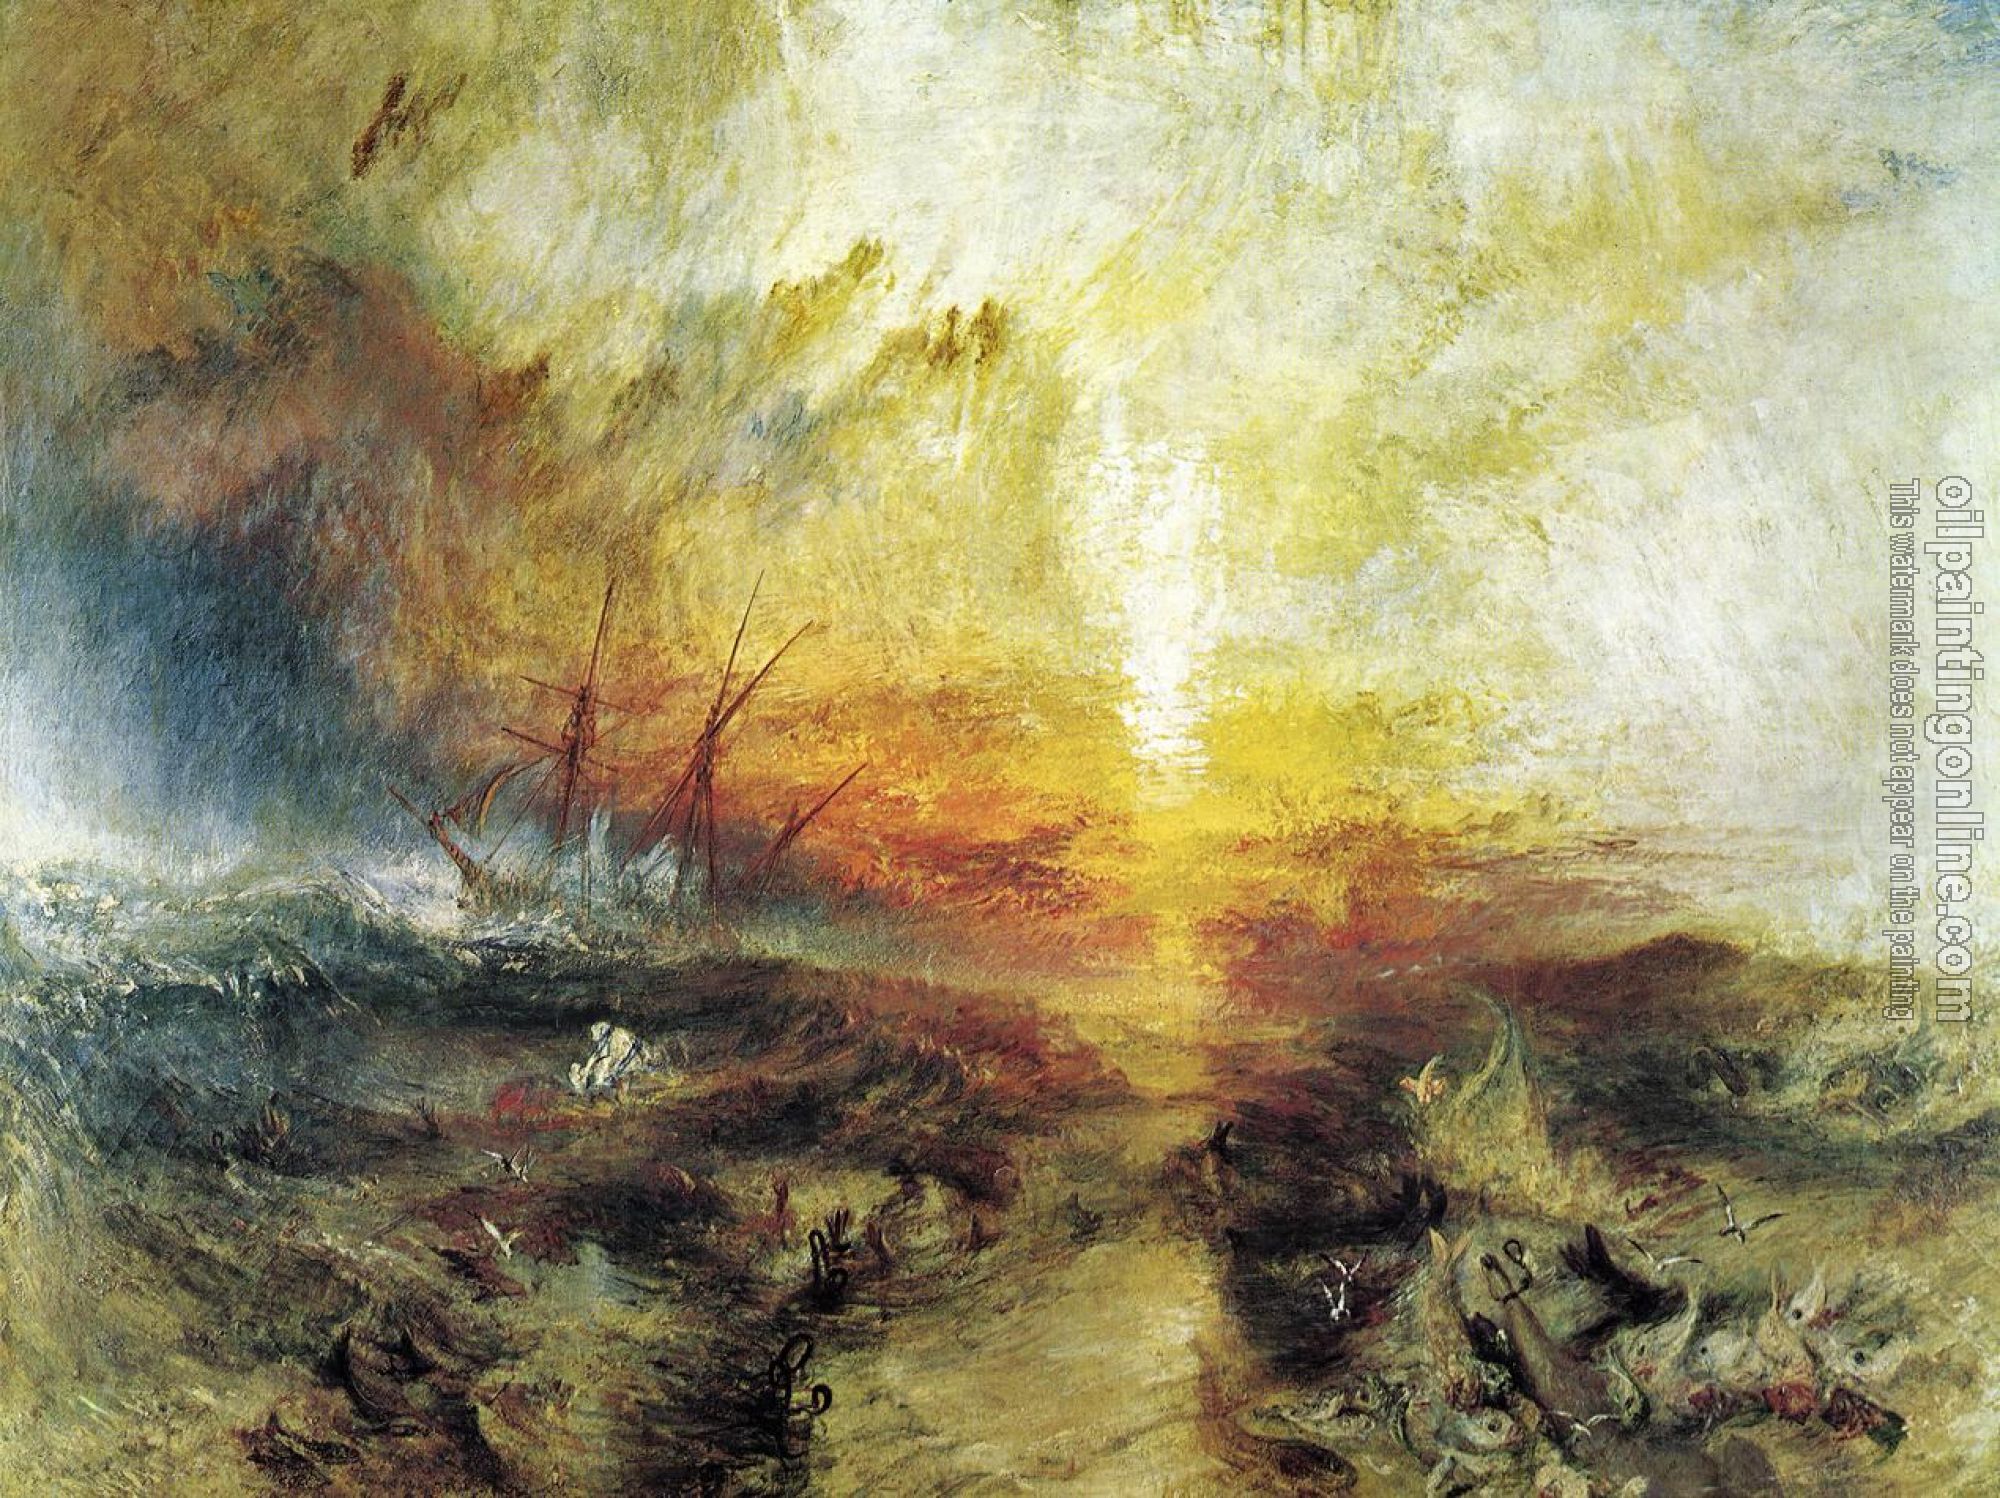 Turner, Joseph Mallord William - Slavers Throwing Overboard the Dead and Dying,Typhoon Coming On